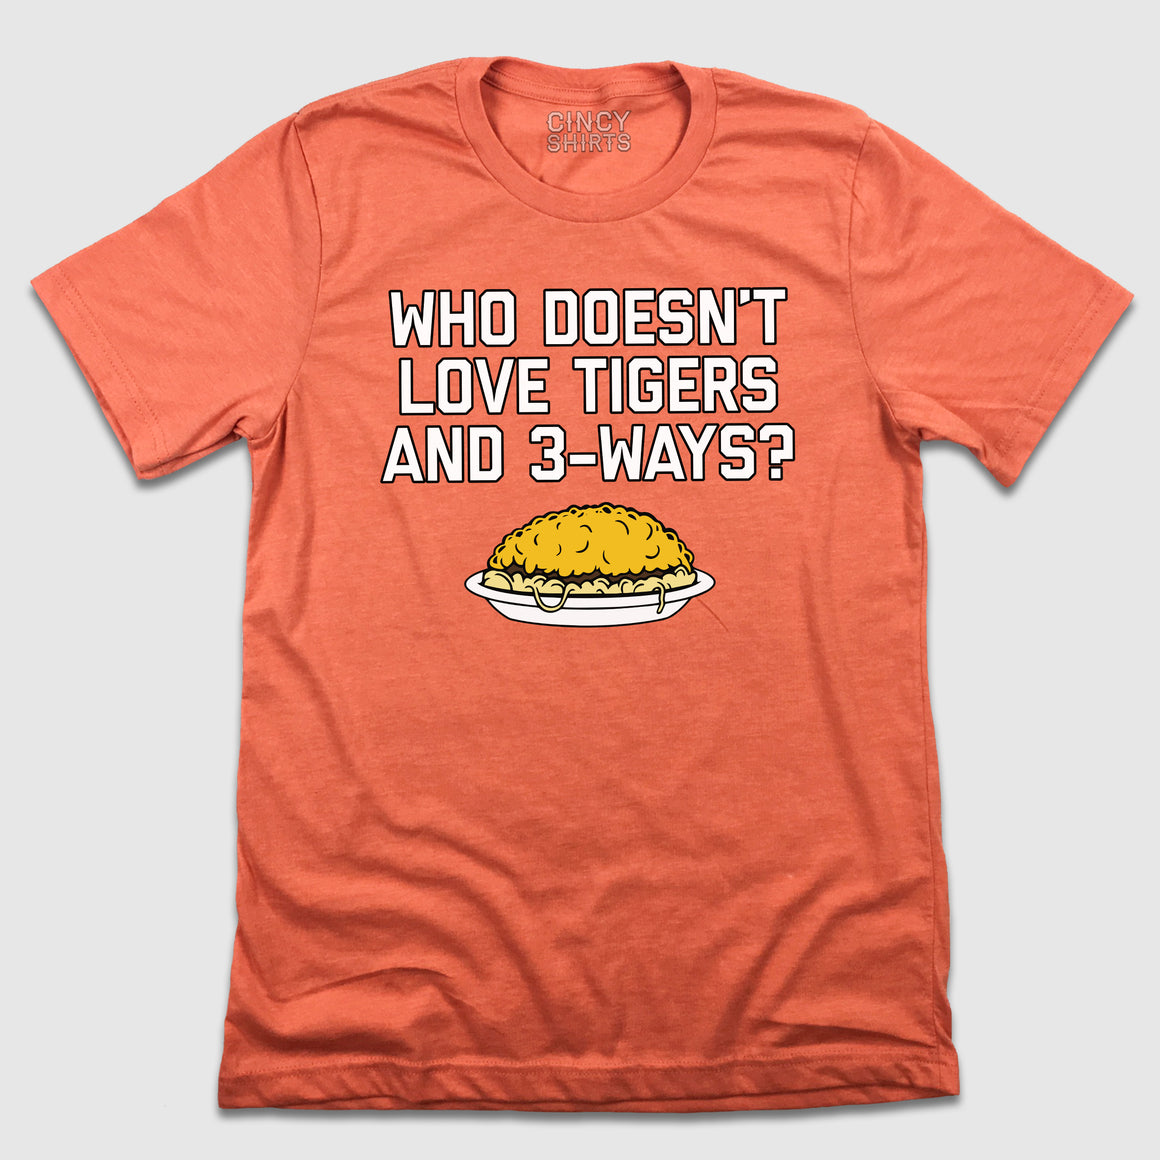 Who Doesn't Like Tigers and 3-Ways - Cincy Shirts